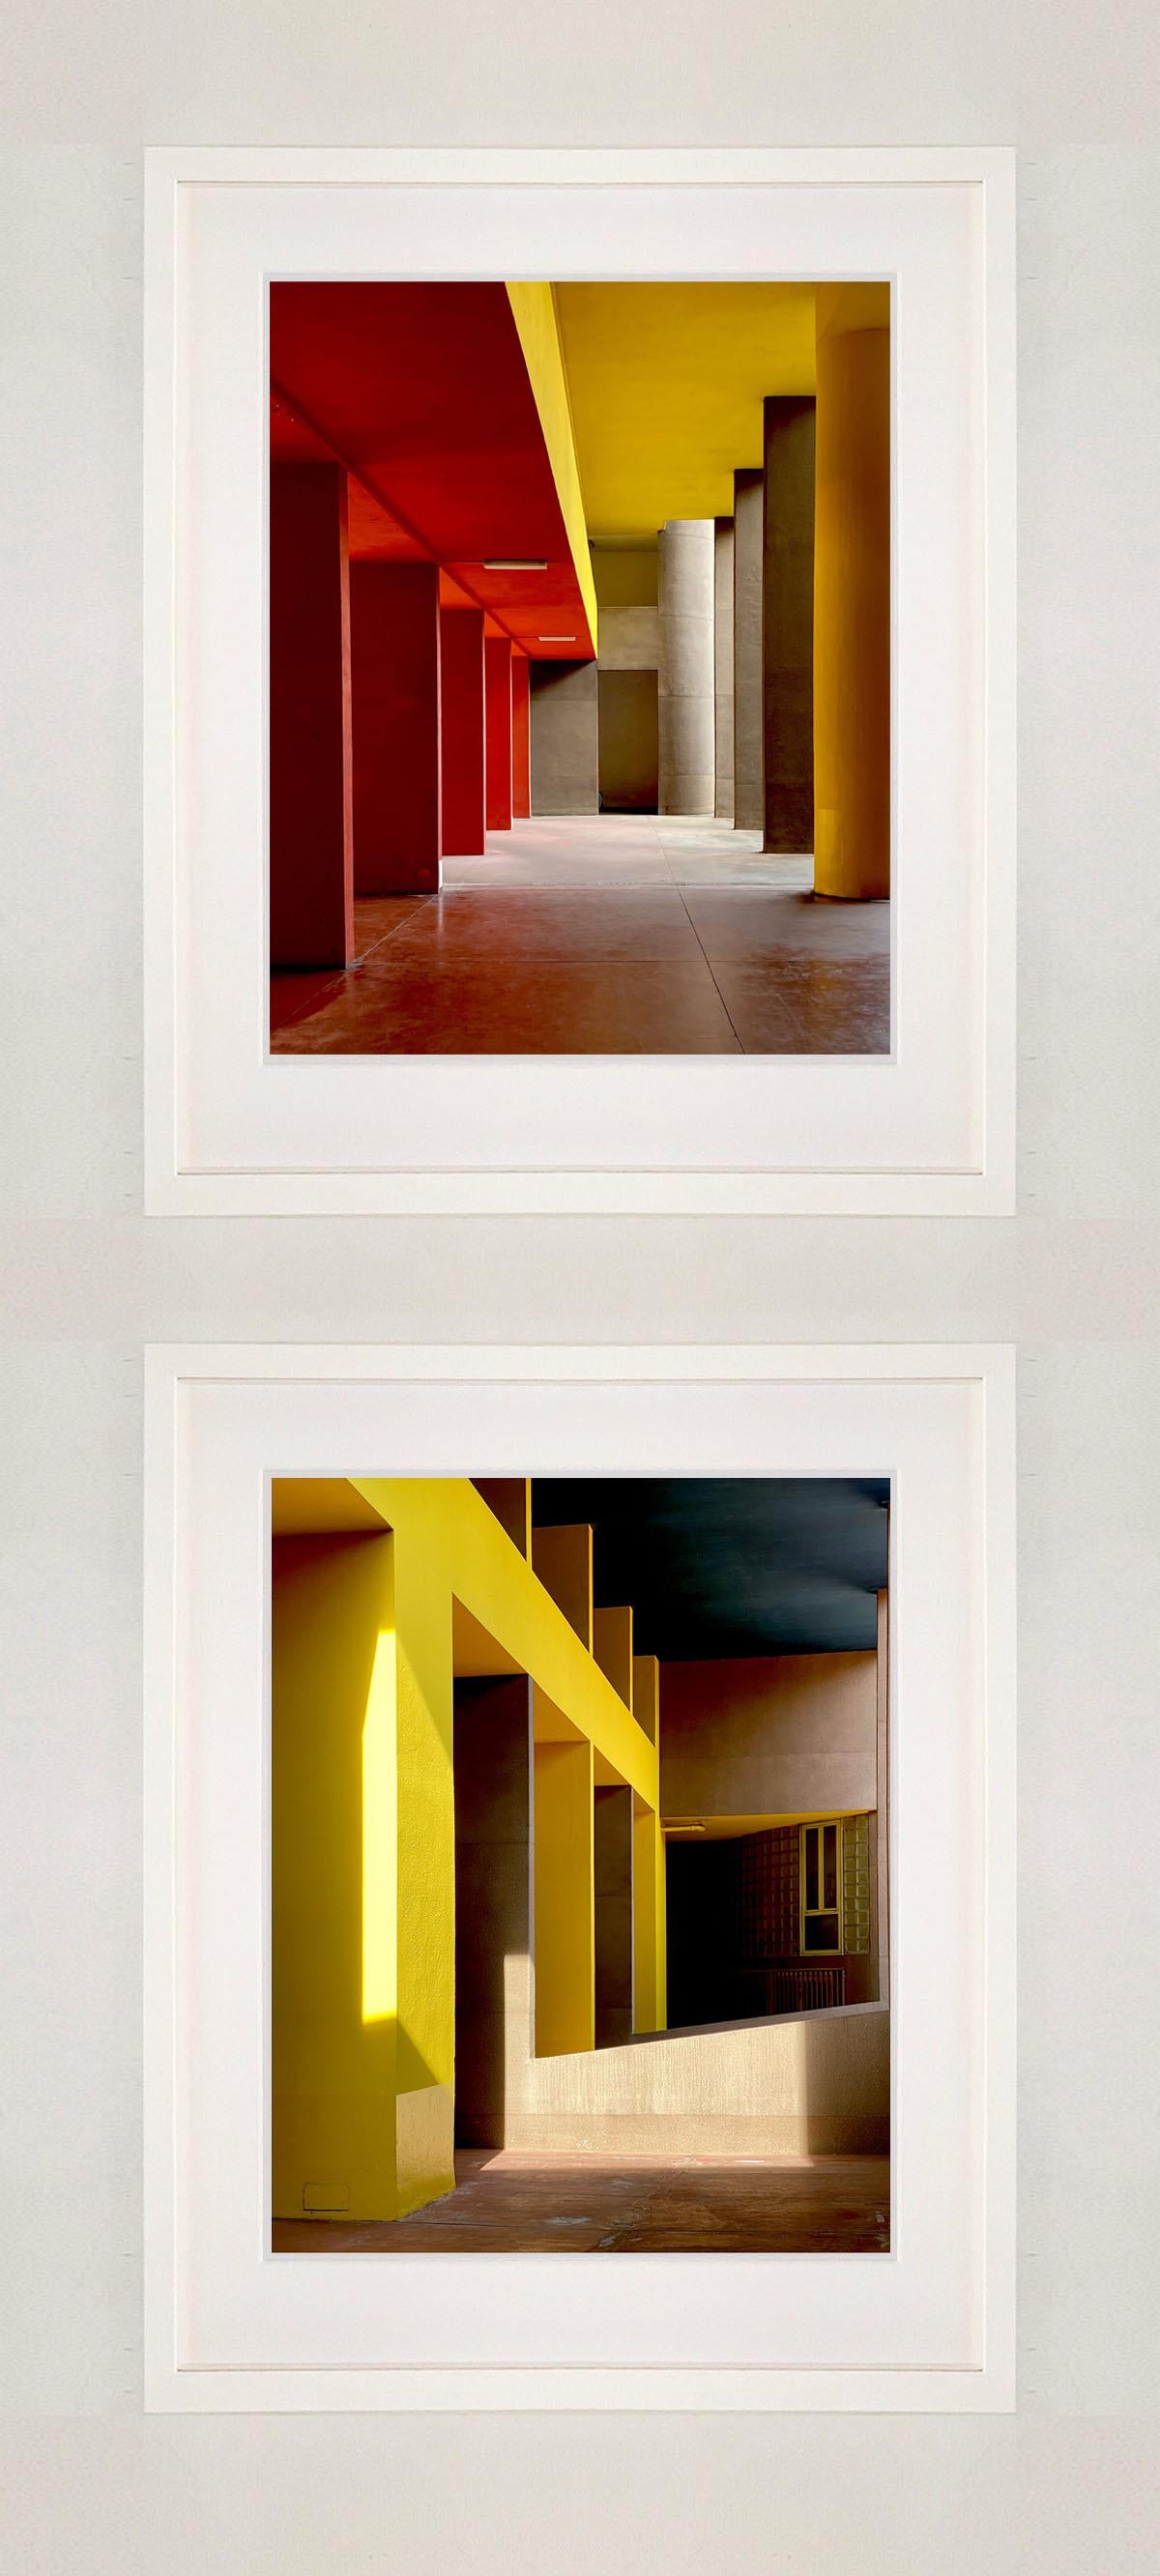 Monte Amiata I and Utopian Foyer IV, Milan - Two Framed Architecture Photographs For Sale 3